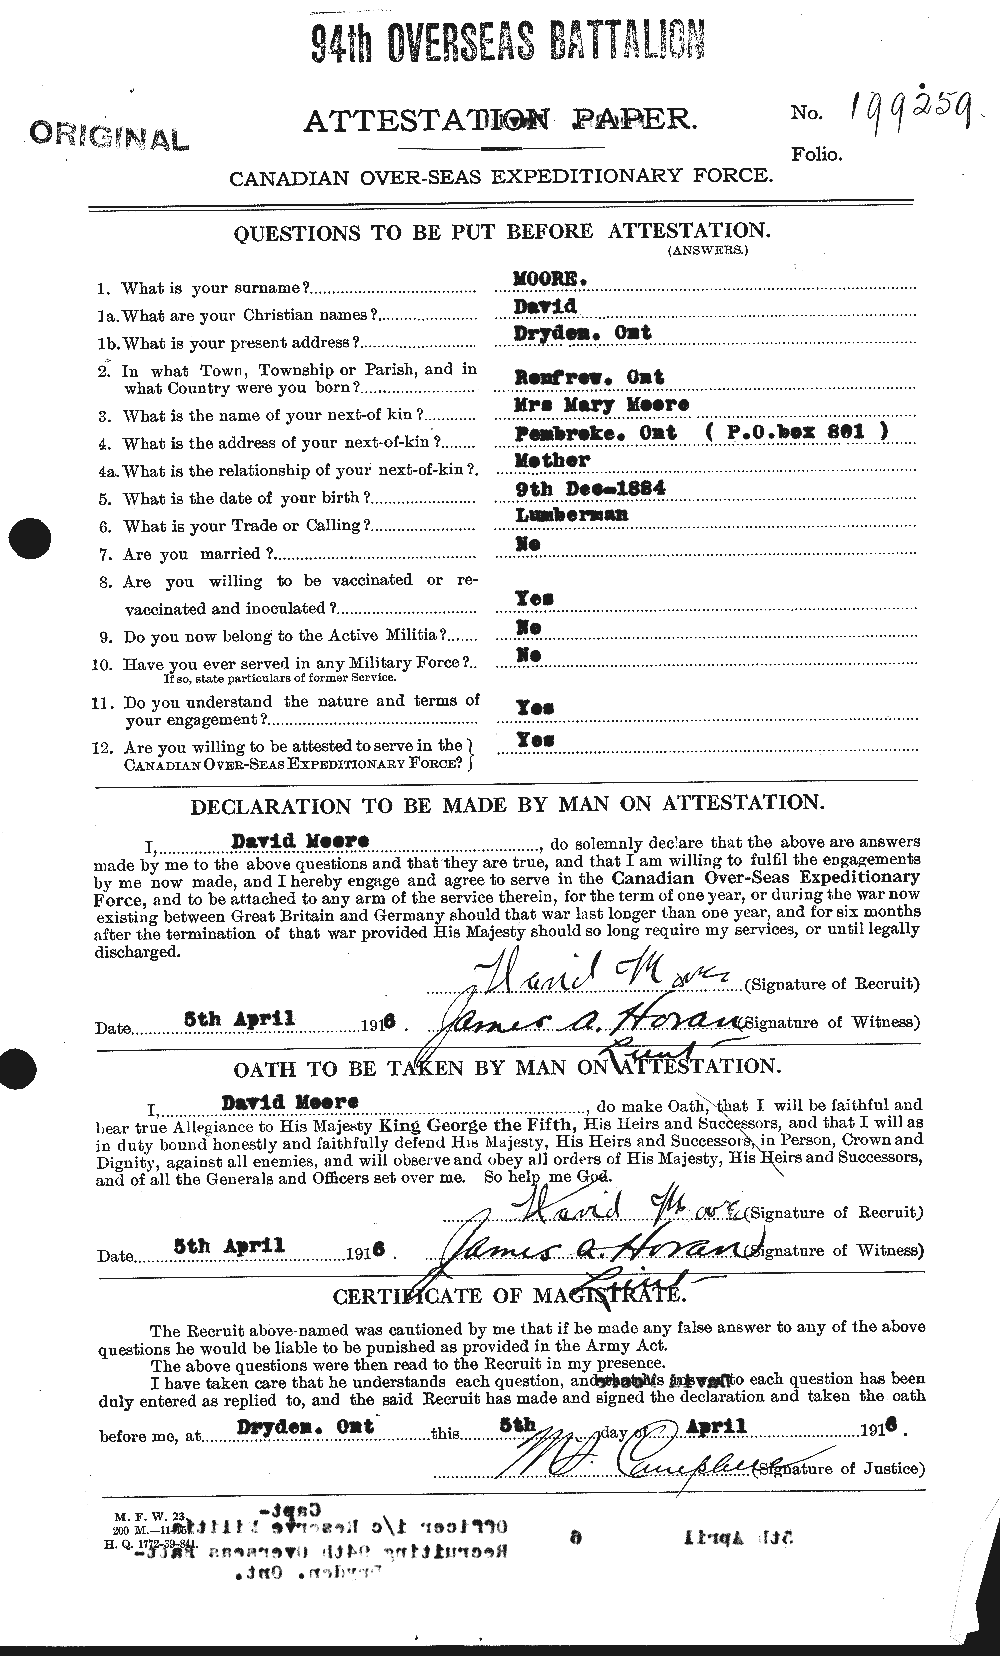 Personnel Records of the First World War - CEF 506568a